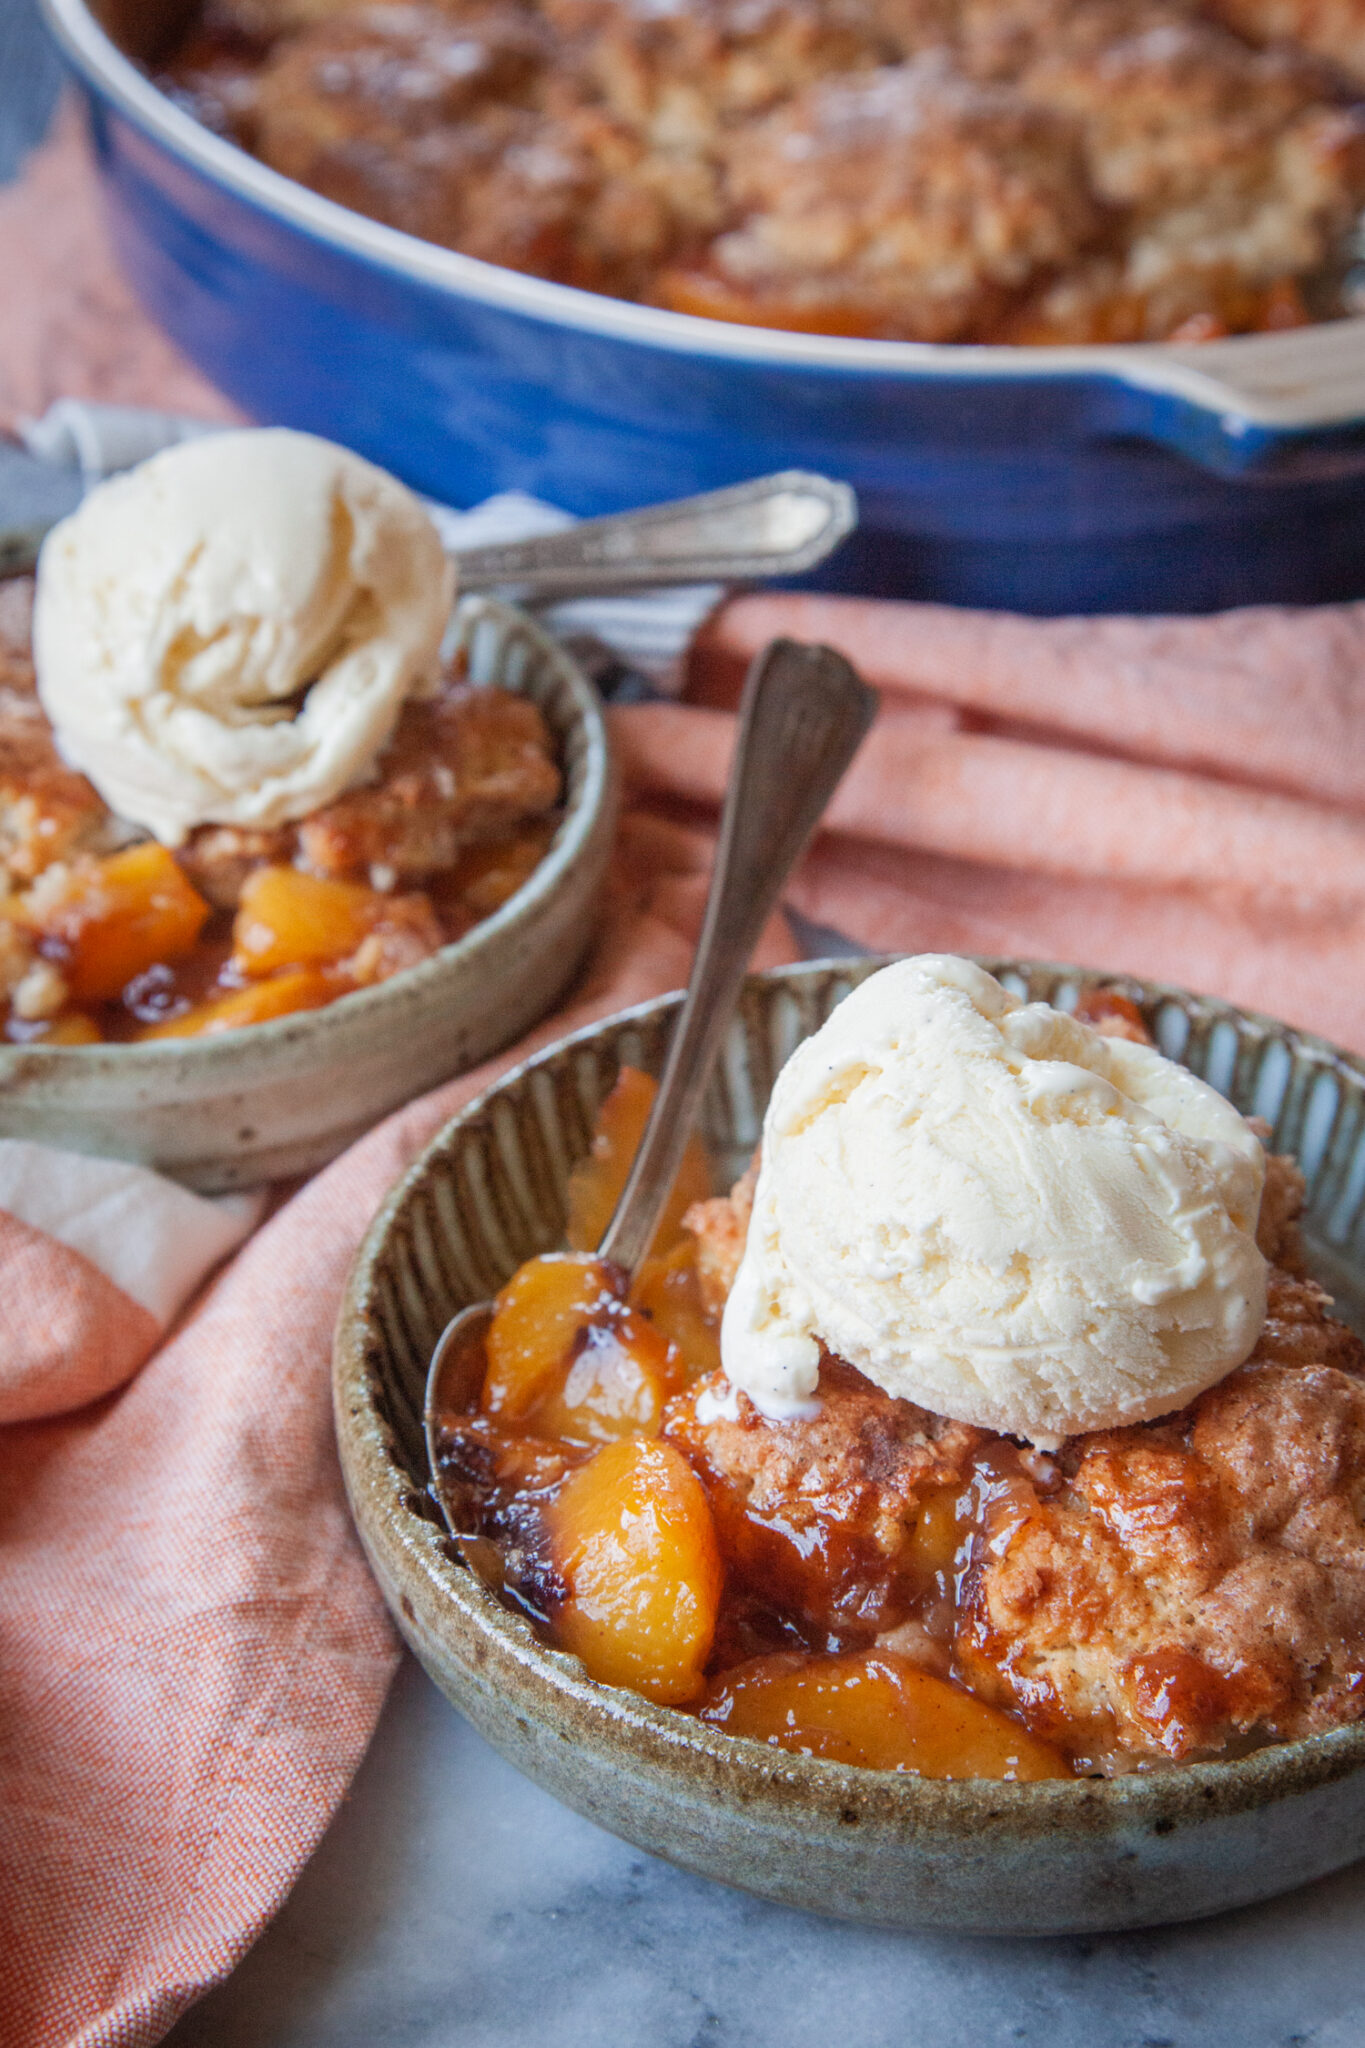 Two shallow bowls of peach cobbler with scoops of vanilla ice cream on top. The remaining cobbler is in a baking dish behind the bowls.